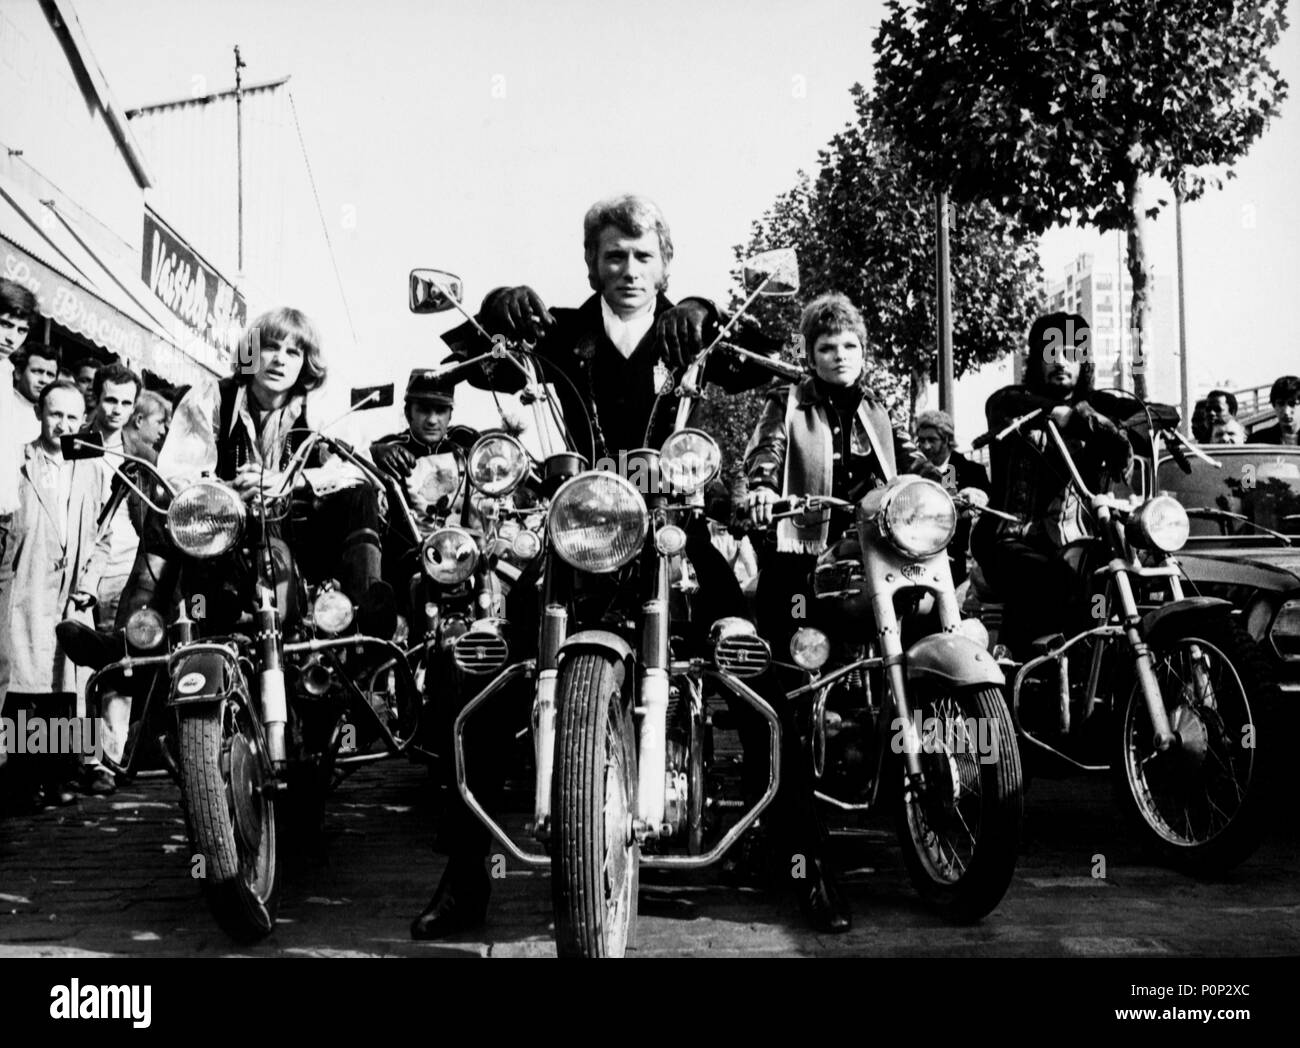 Original Film Title: A TOUT CASER.  English Title: BREAKING IT UP.  Film Director: JOHN BERRY.  Year: 1968.  Stars: JEAN-PHILIPPE SMET HALLYDAY. Credit: FINISTERE FILMS/CCFC/UNITED PICTURES / Album Stock Photo